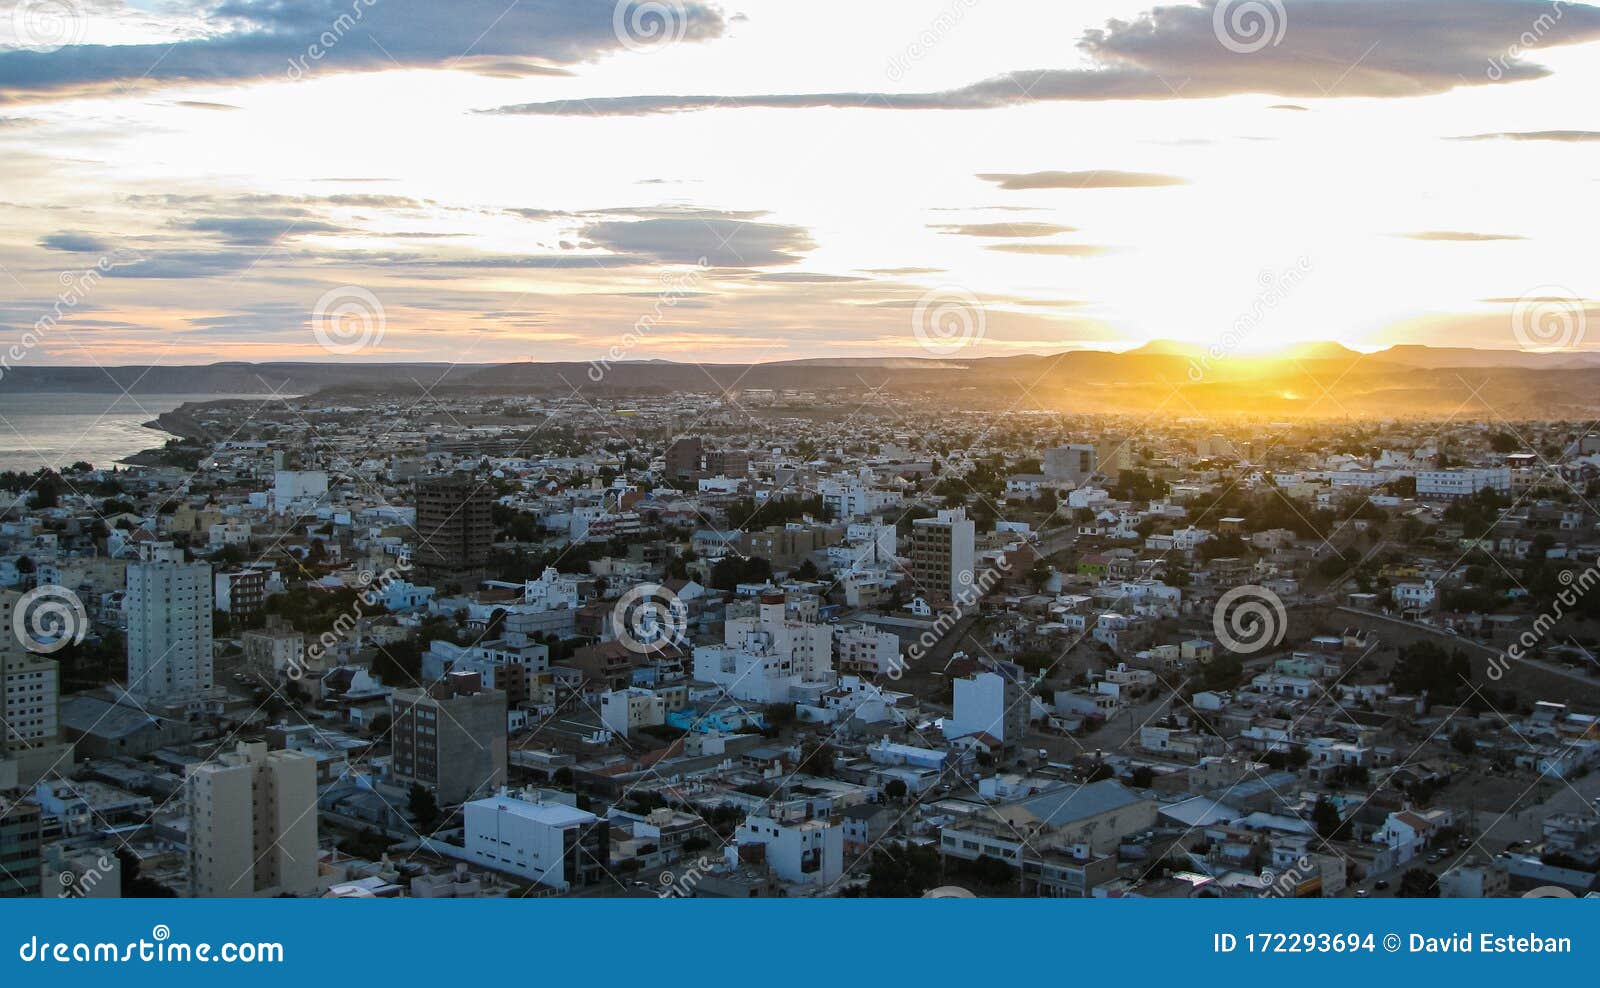 comodoro rivadia city, in the province of chubut. patagonia, argentina